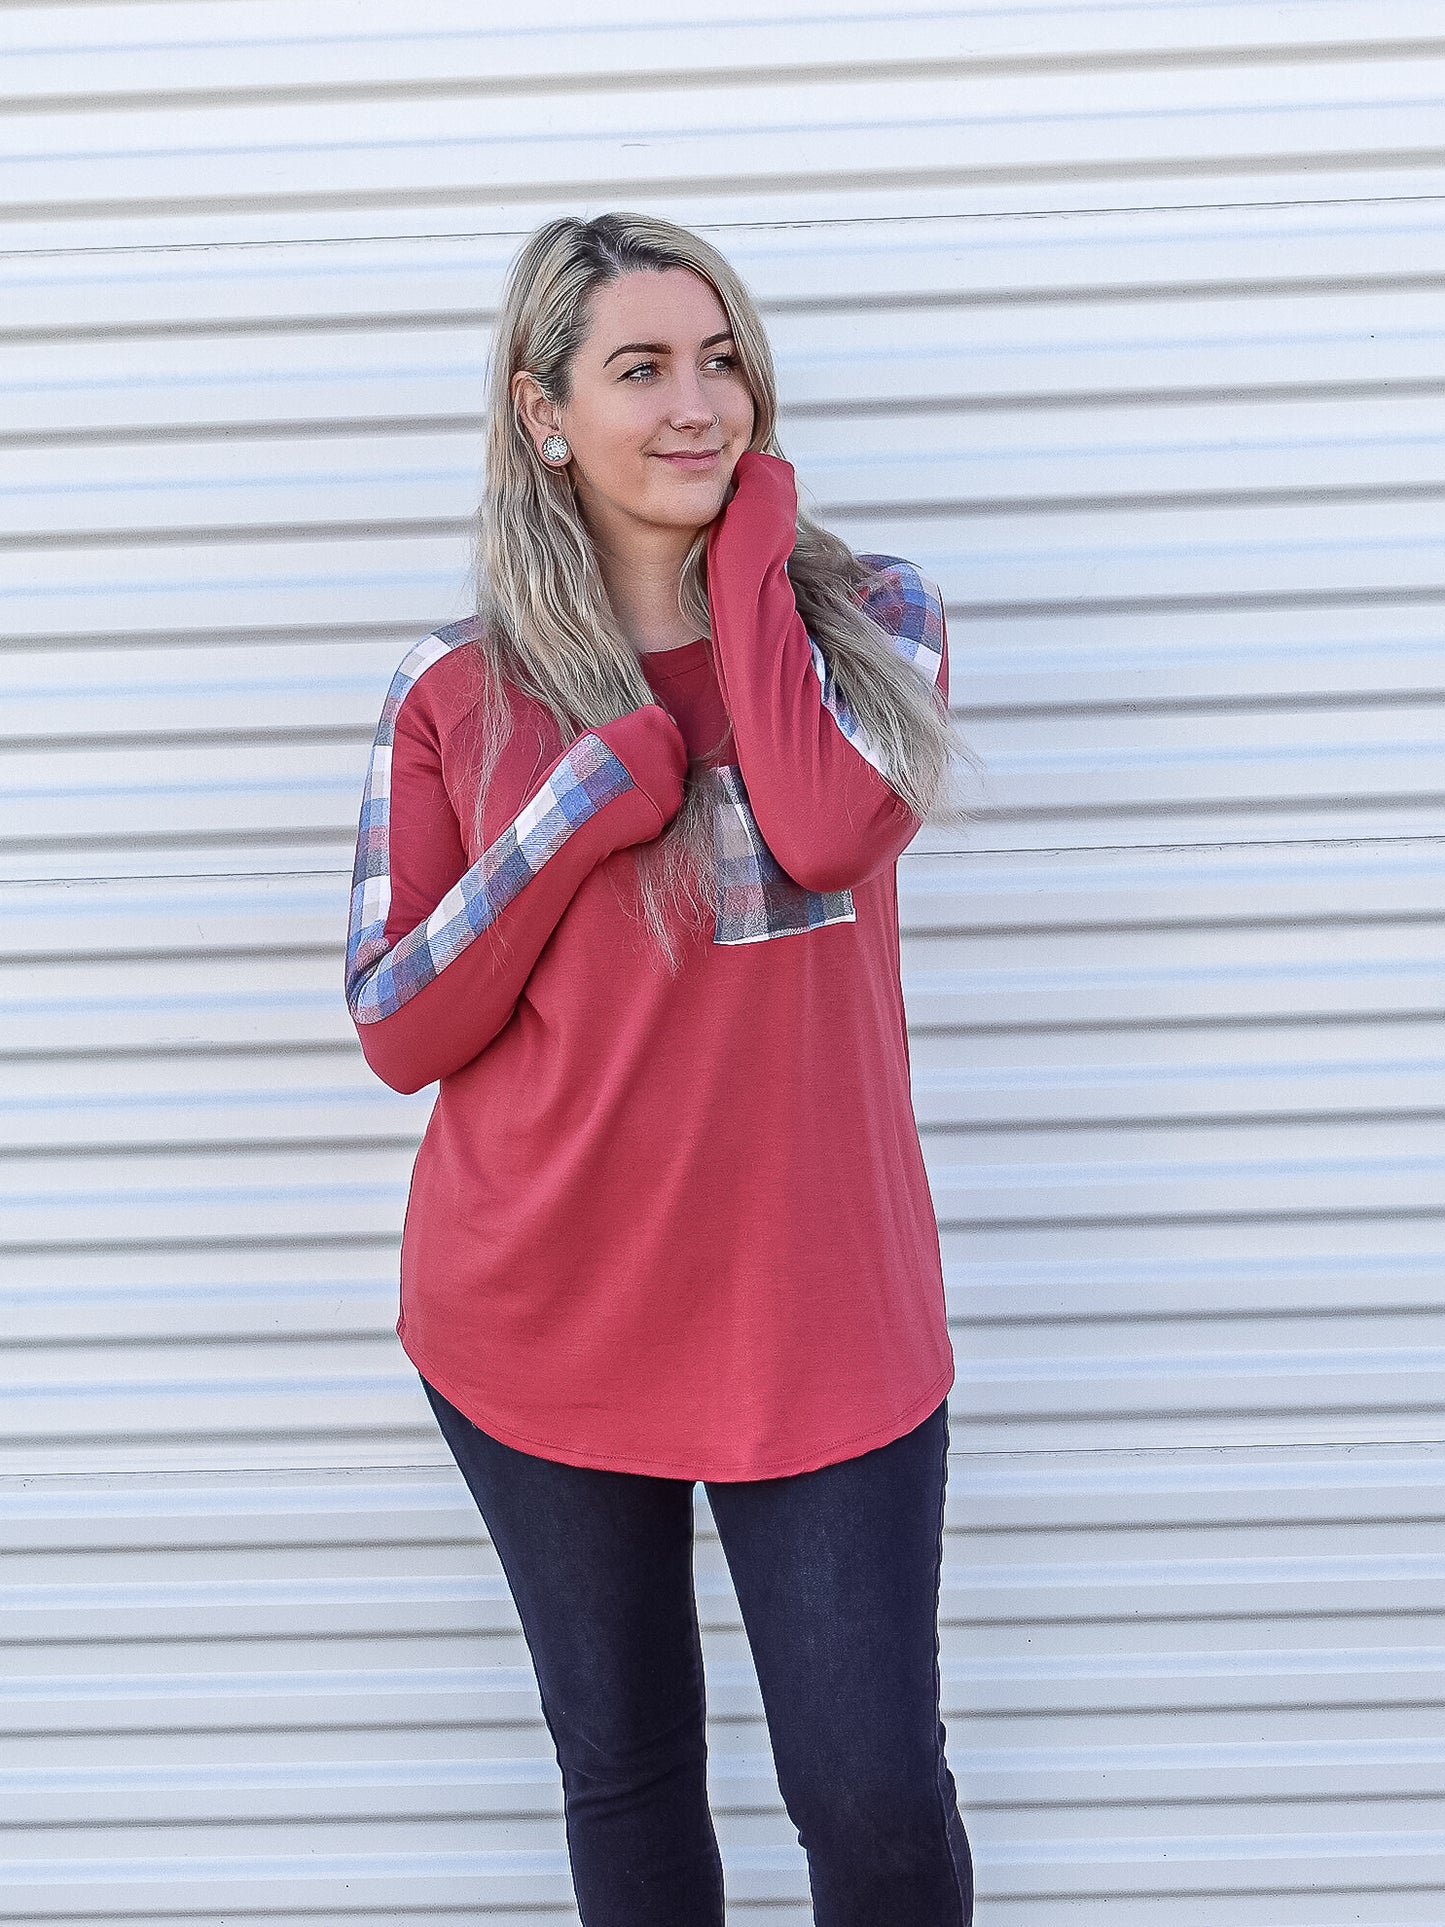 Cranberry red long sleeve with blue plaid detail on the pocket and down the top of the sleeves.